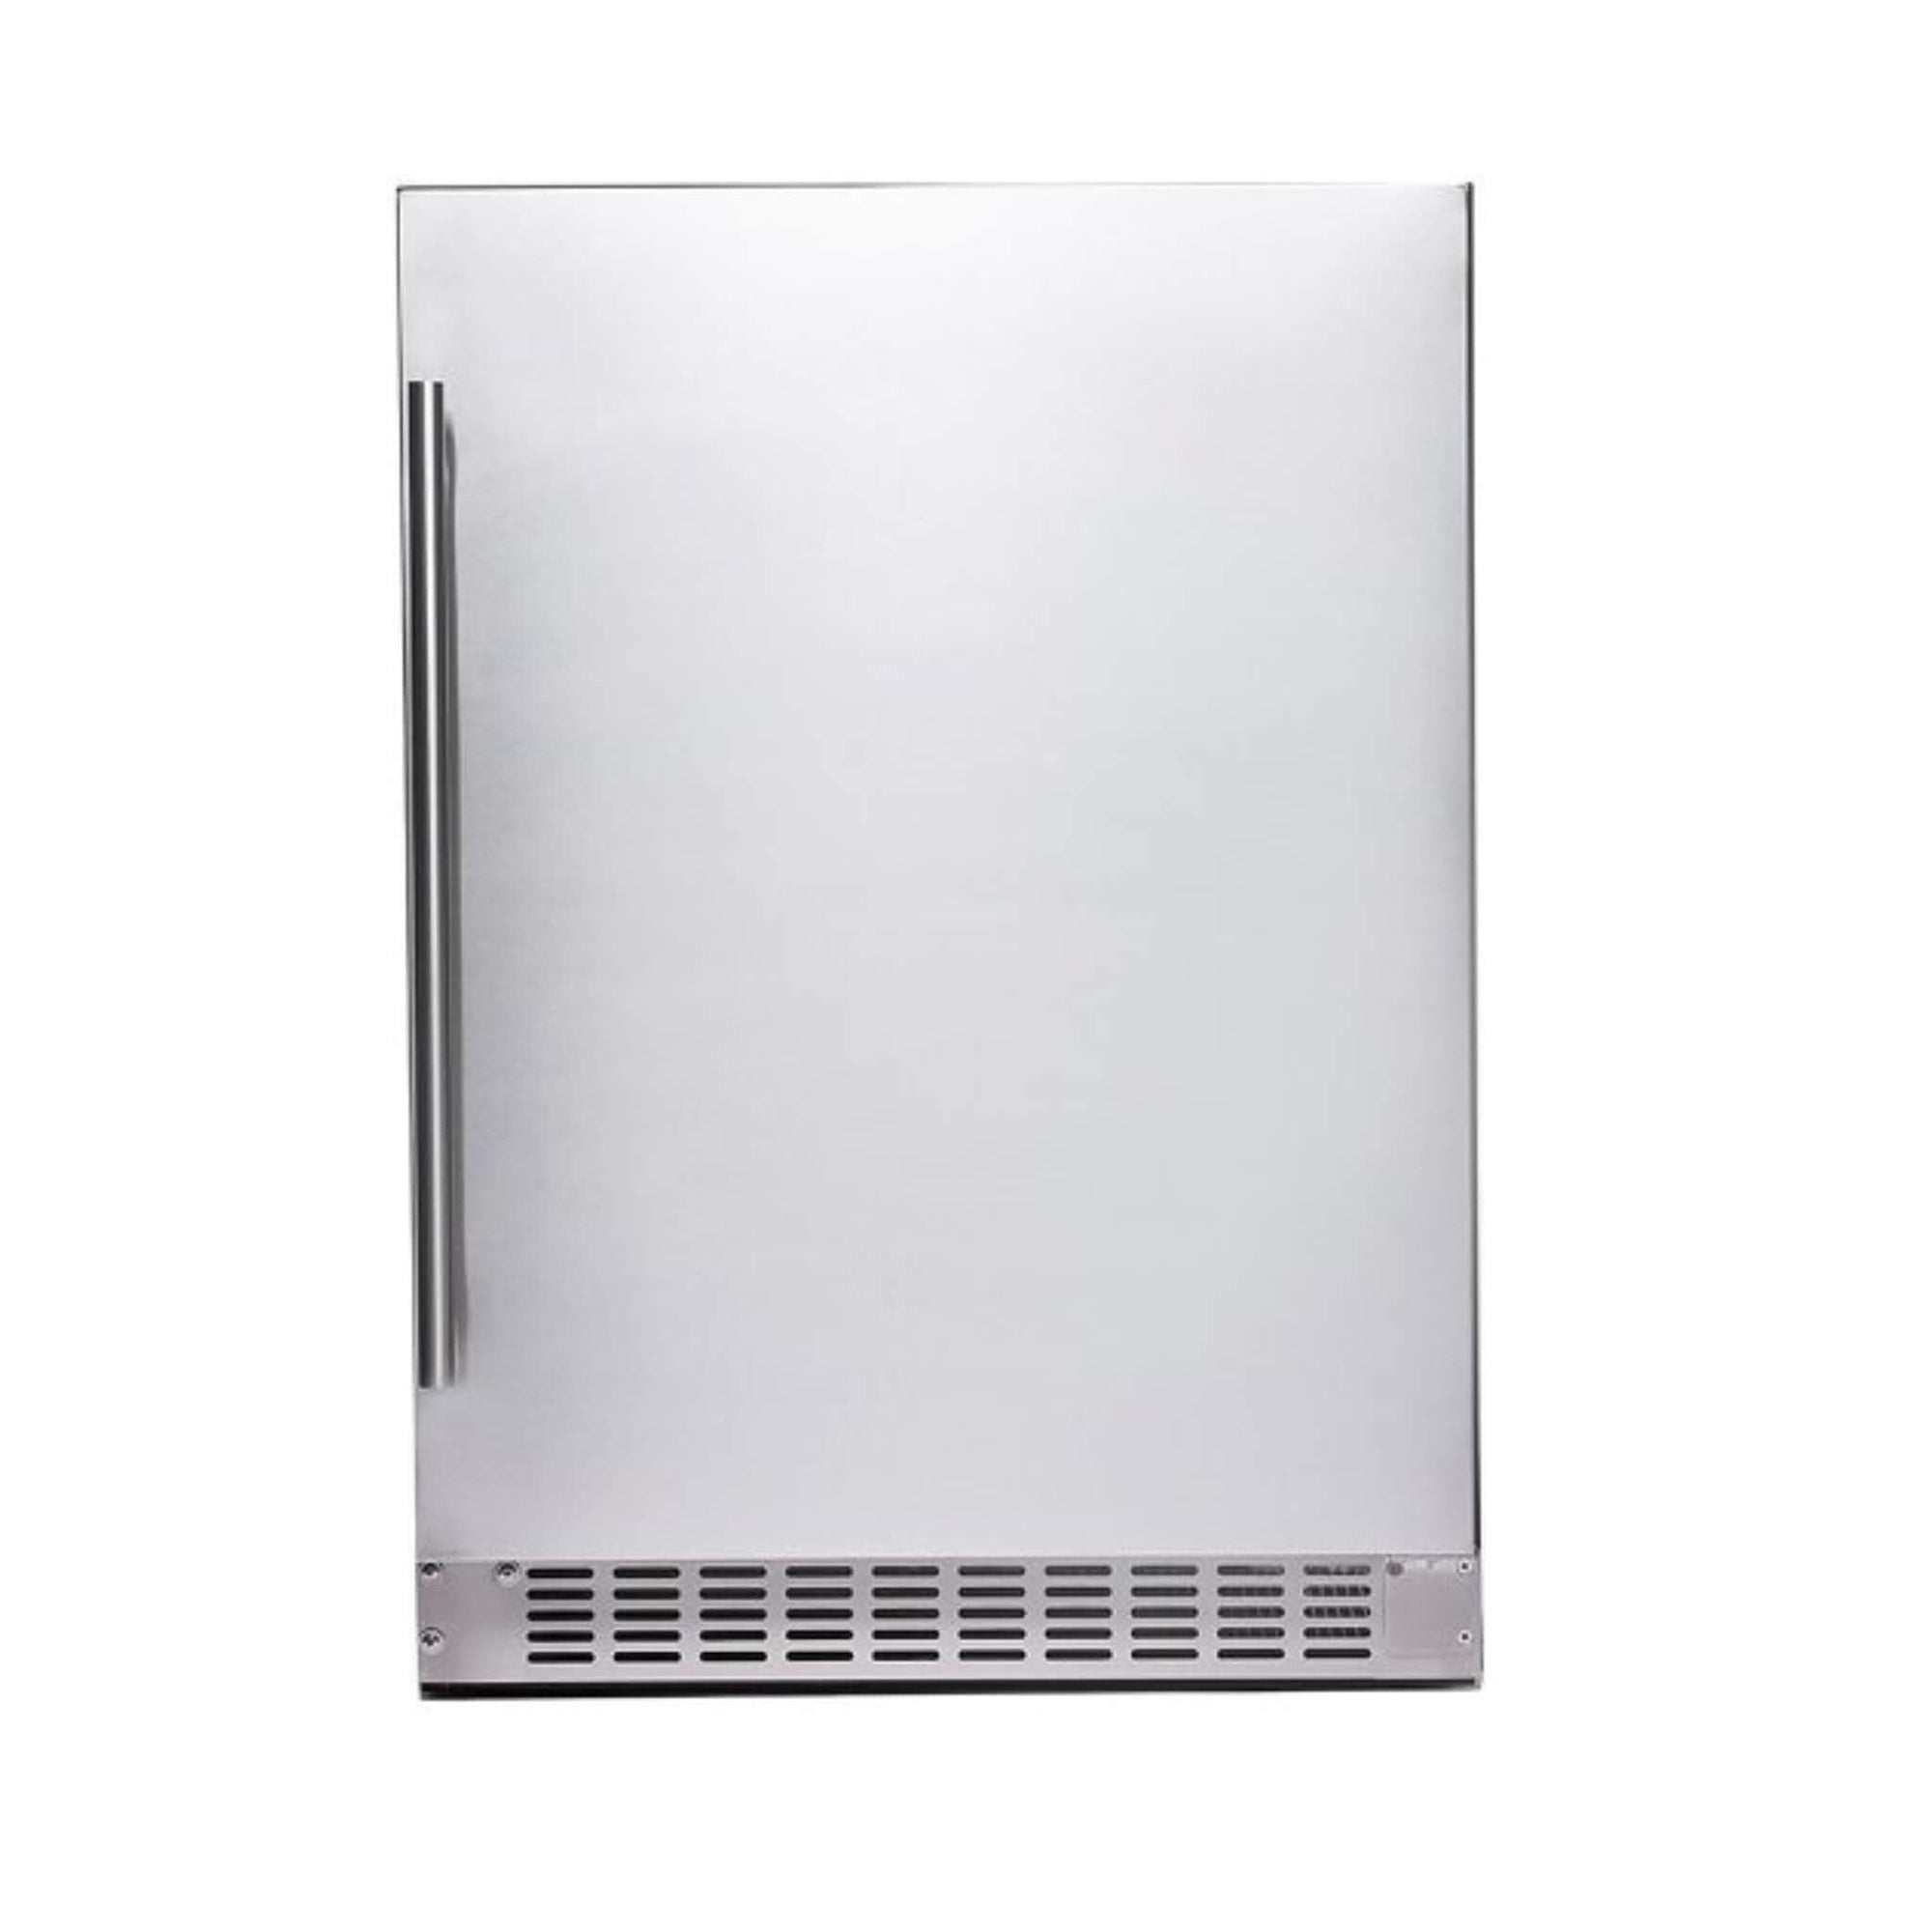 Azure 24" Refrigerator with Solid Stainless Door - Culinary Hardware